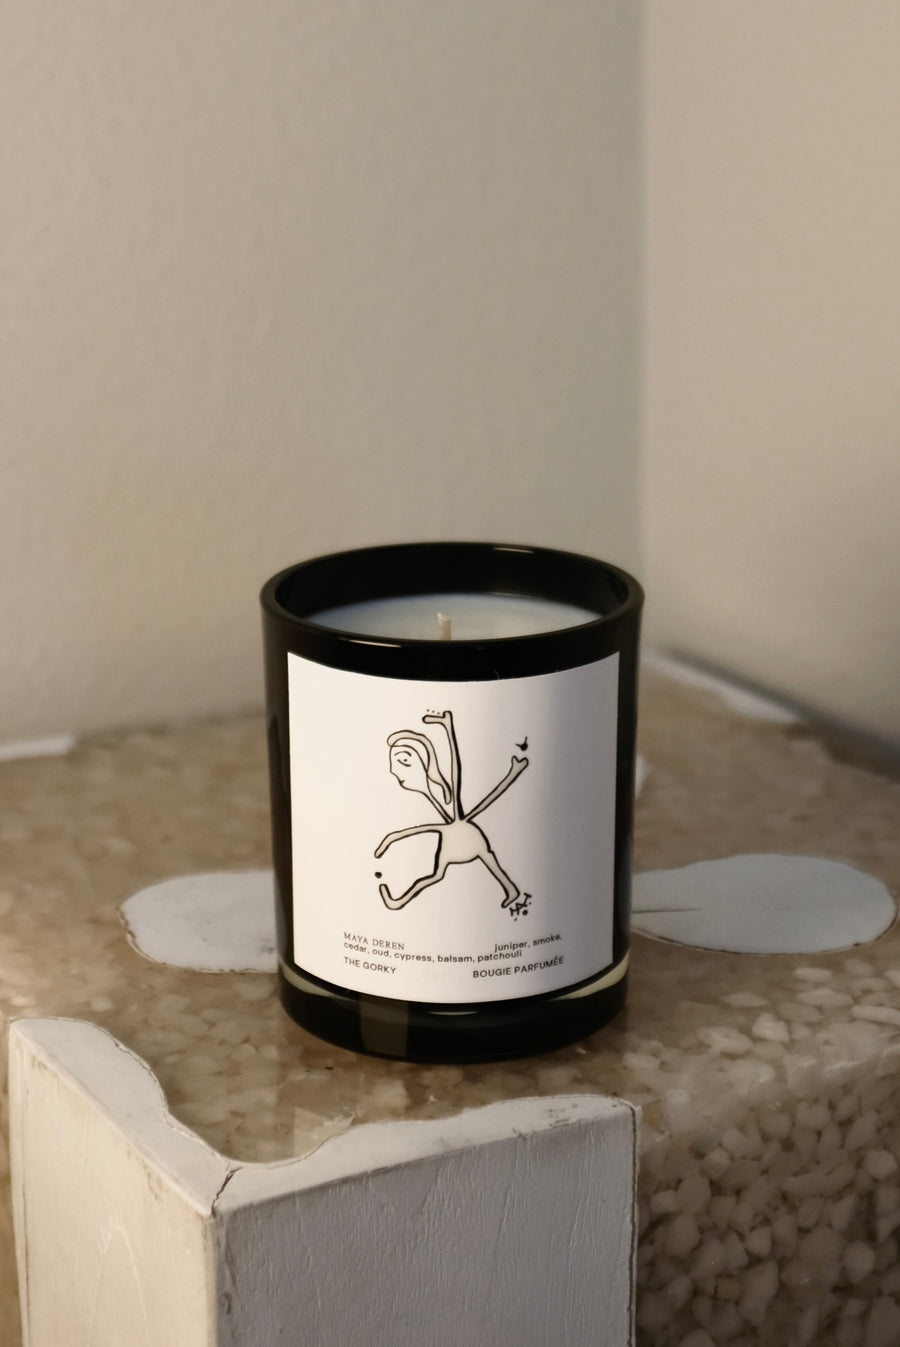 Gorky "Chignons D'hiver" Maya Deren Soy Wax Candle